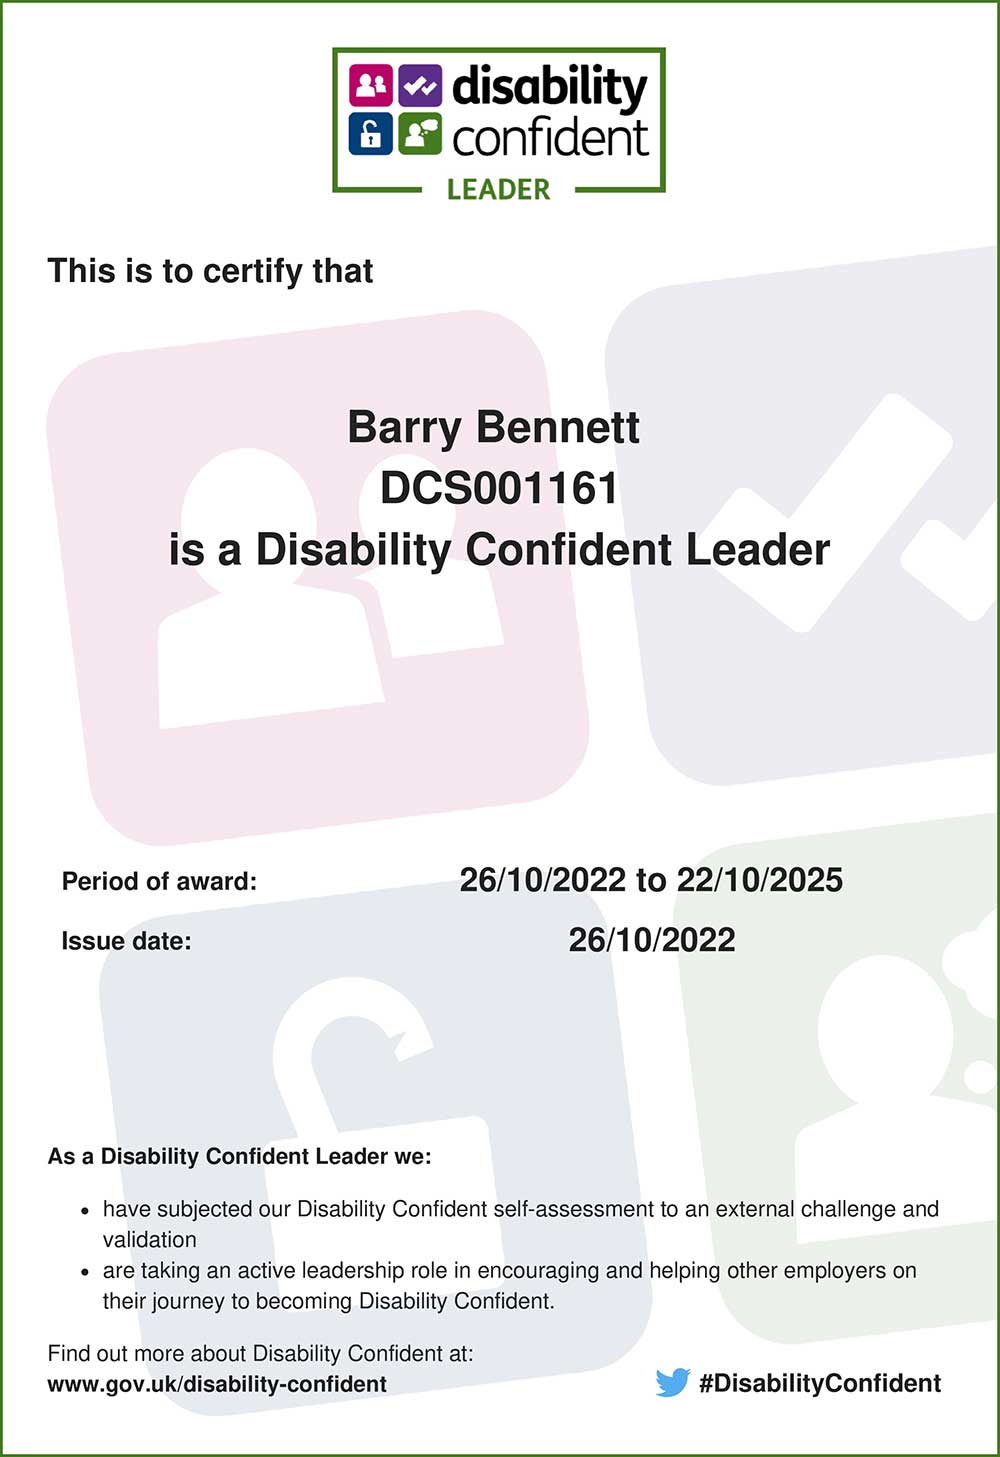 Disability confident employer certificate